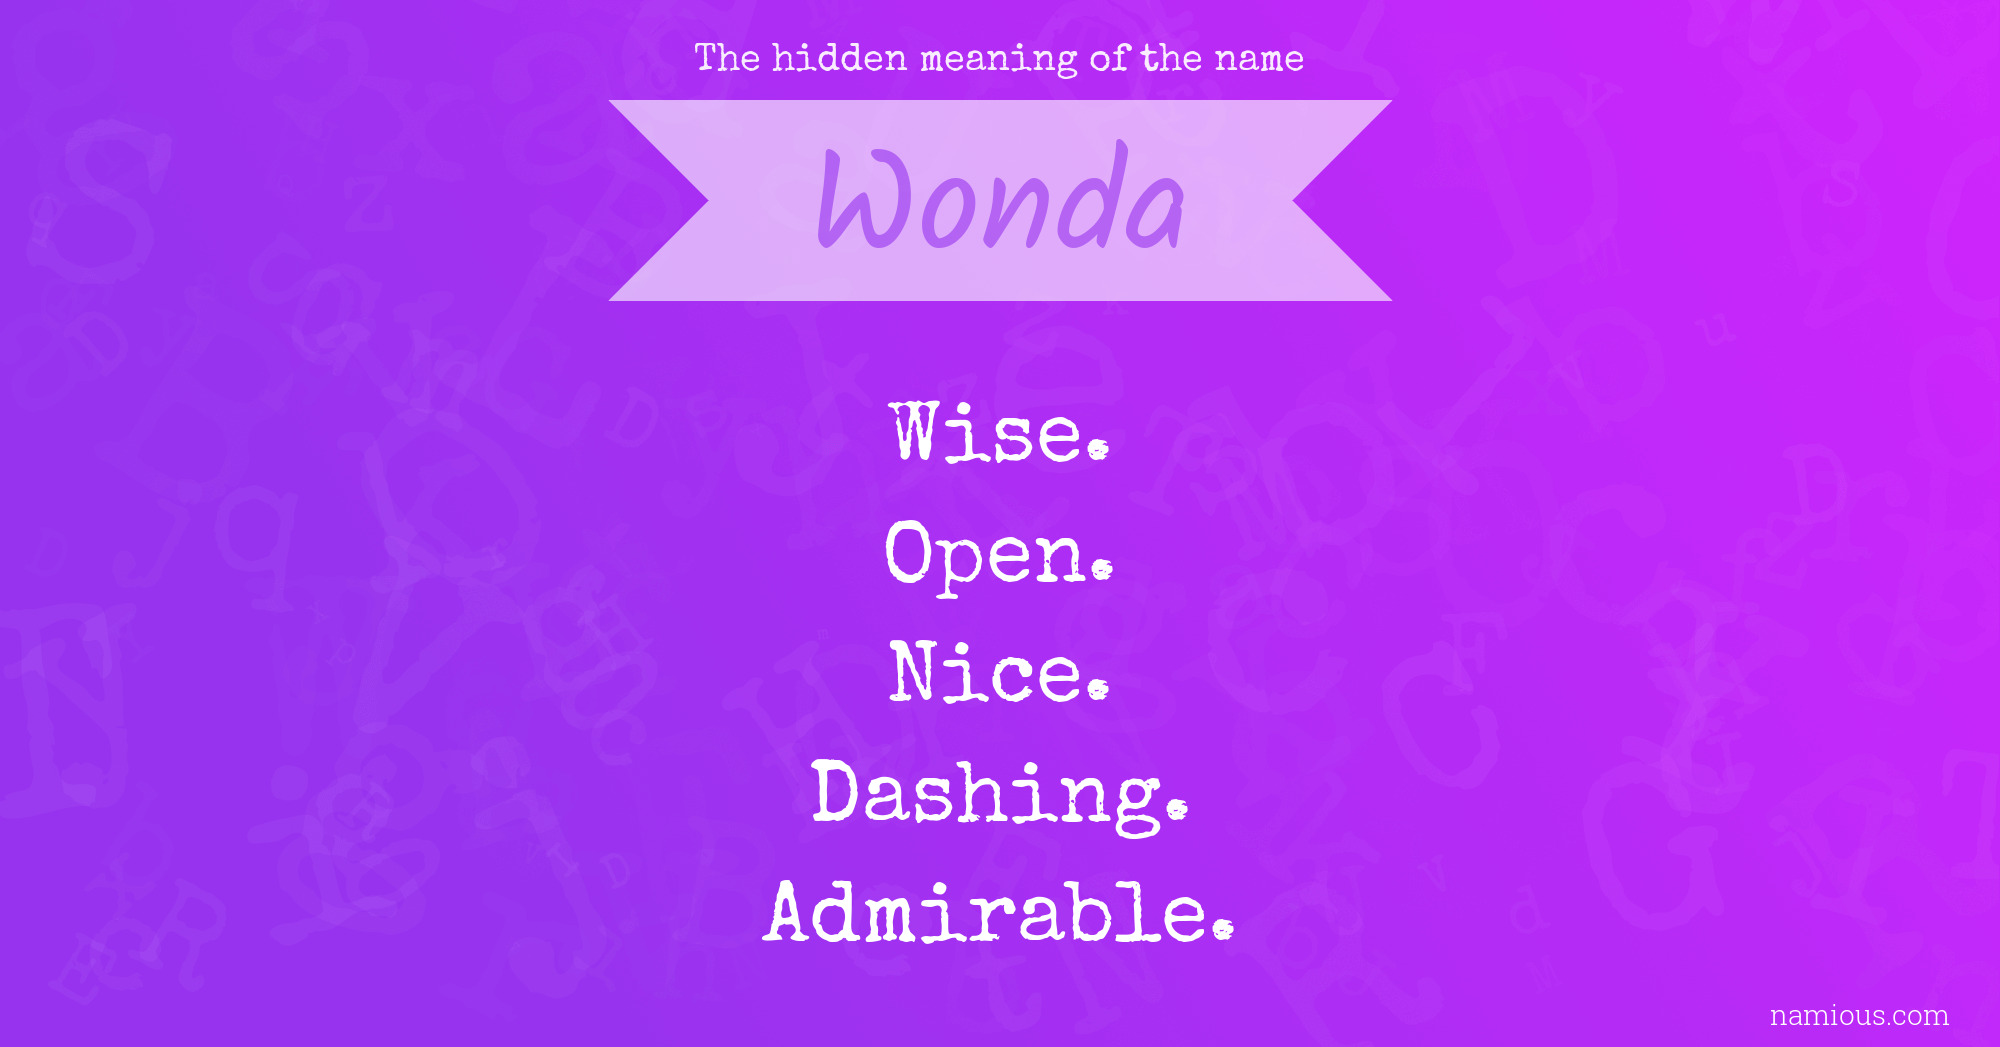 The hidden meaning of the name Wonda